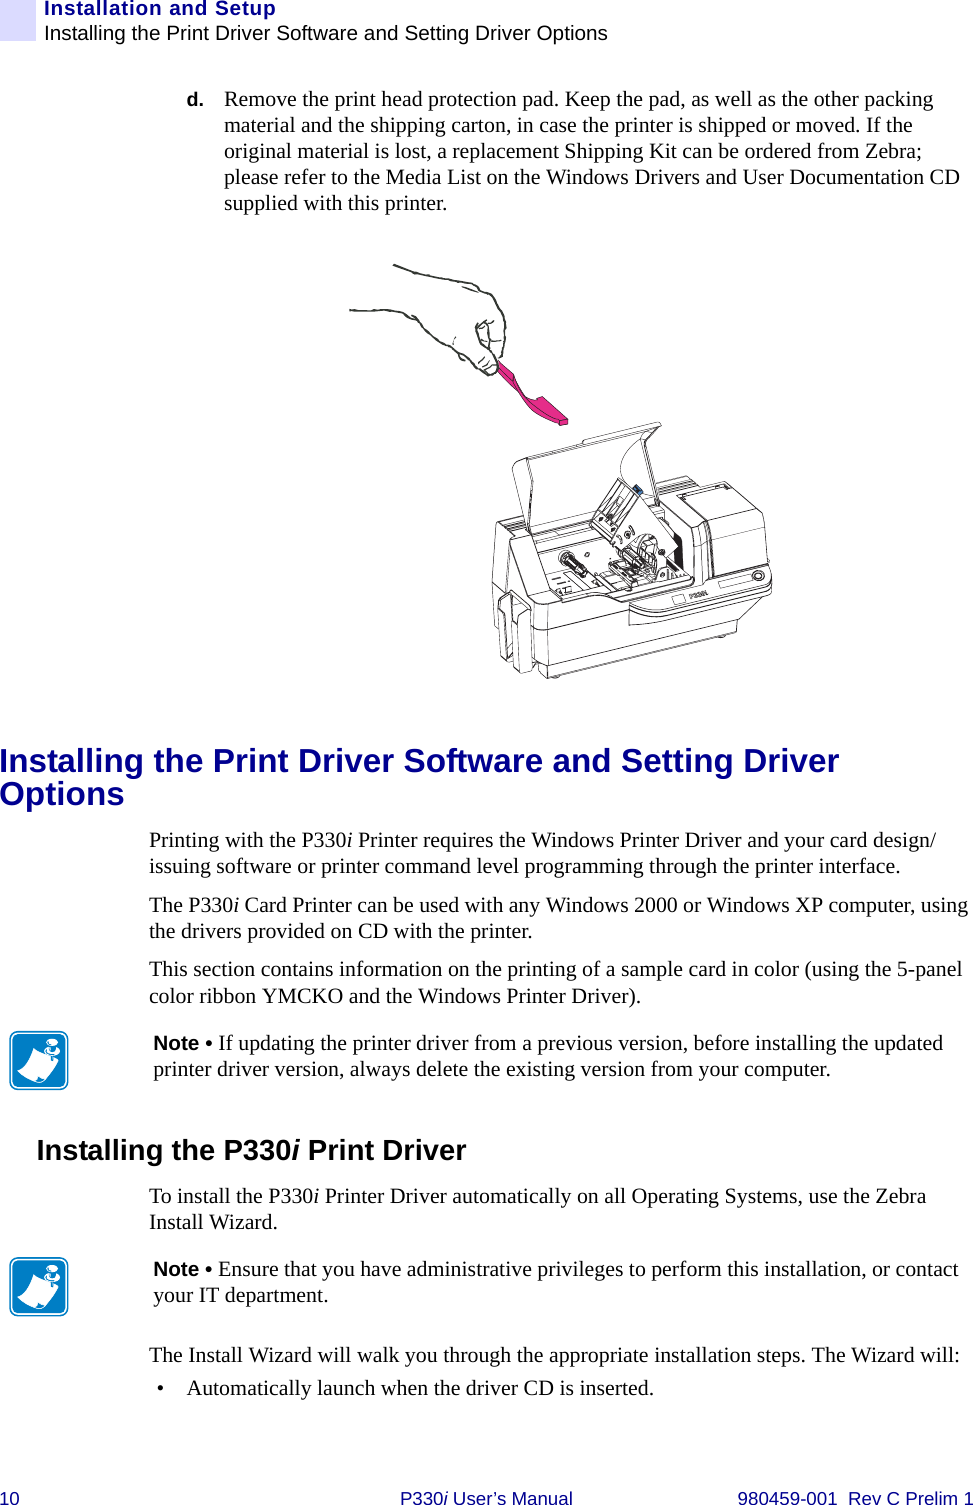 10 P330i User’s Manual 980459-001  Rev C Prelim 1Installation and SetupInstalling the Print Driver Software and Setting Driver Optionsd. Remove the print head protection pad. Keep the pad, as well as the other packing material and the shipping carton, in case the printer is shipped or moved. If the original material is lost, a replacement Shipping Kit can be ordered from Zebra; please refer to the Media List on the Windows Drivers and User Documentation CD supplied with this printer.Installing the Print Driver Software and Setting Driver OptionsPrinting with the P330i Printer requires the Windows Printer Driver and your card design/issuing software or printer command level programming through the printer interface.The P330i Card Printer can be used with any Windows 2000 or Windows XP computer, using the drivers provided on CD with the printer.This section contains information on the printing of a sample card in color (using the 5-panel color ribbon YMCKO and the Windows Printer Driver).Installing the P330i Print Driver To install the P330i Printer Driver automatically on all Operating Systems, use the Zebra Install Wizard.The Install Wizard will walk you through the appropriate installation steps. The Wizard will:• Automatically launch when the driver CD is inserted. Note • If updating the printer driver from a previous version, before installing the updated printer driver version, always delete the existing version from your computer.Note • Ensure that you have administrative privileges to perform this installation, or contact your IT department.